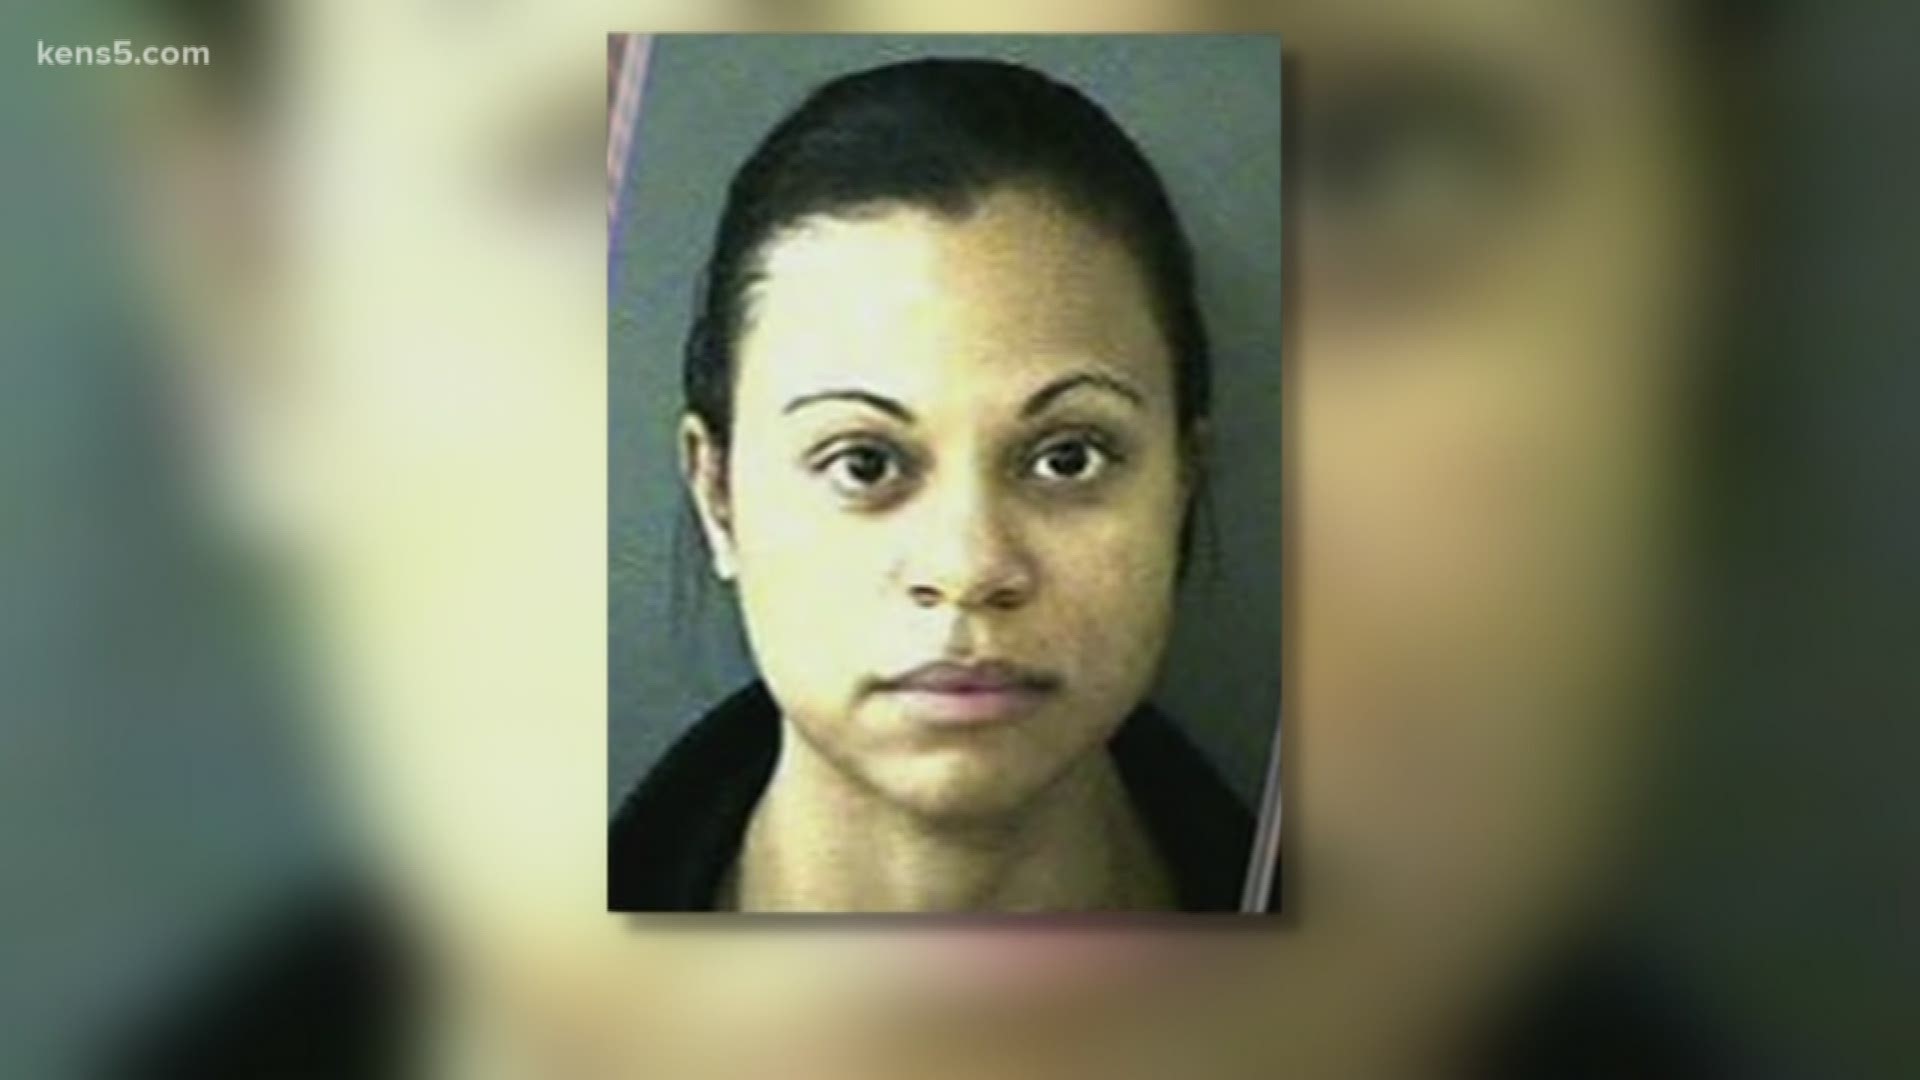 Vanessa Cameron was convicted of murder and sentenced to life in prison. Authorities say she hired a couple to kill her child's father, Samuel Johnson Jr., and dumped his body in a cemetery back in 2010. Her motive was his $750,000 life insurance policy. Cameron was previously convicted and sentenced to 70 years but a trial error overturned the conviction in 2012.